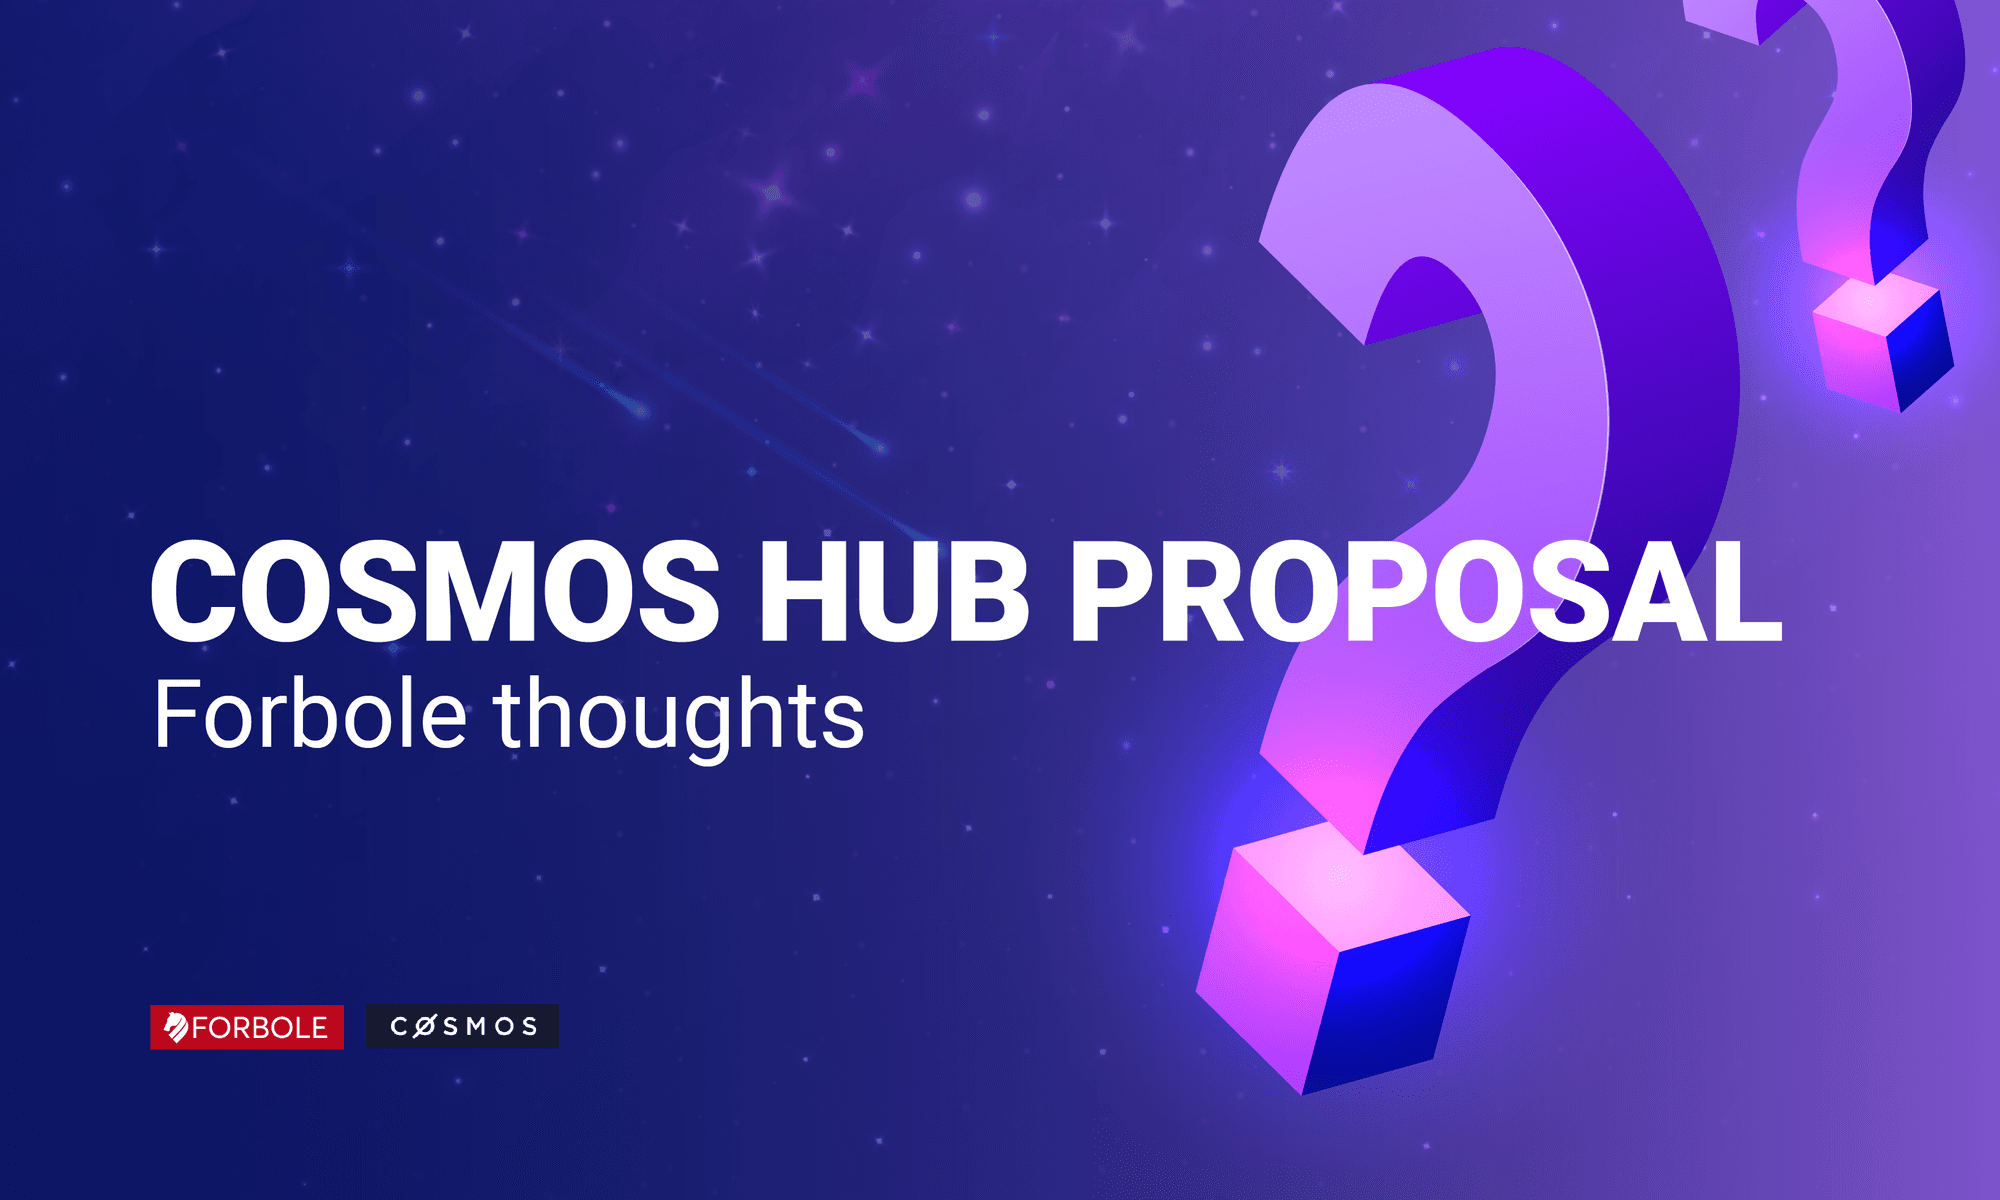 Forbole’s thought on Cosmos Hub Proposal 34